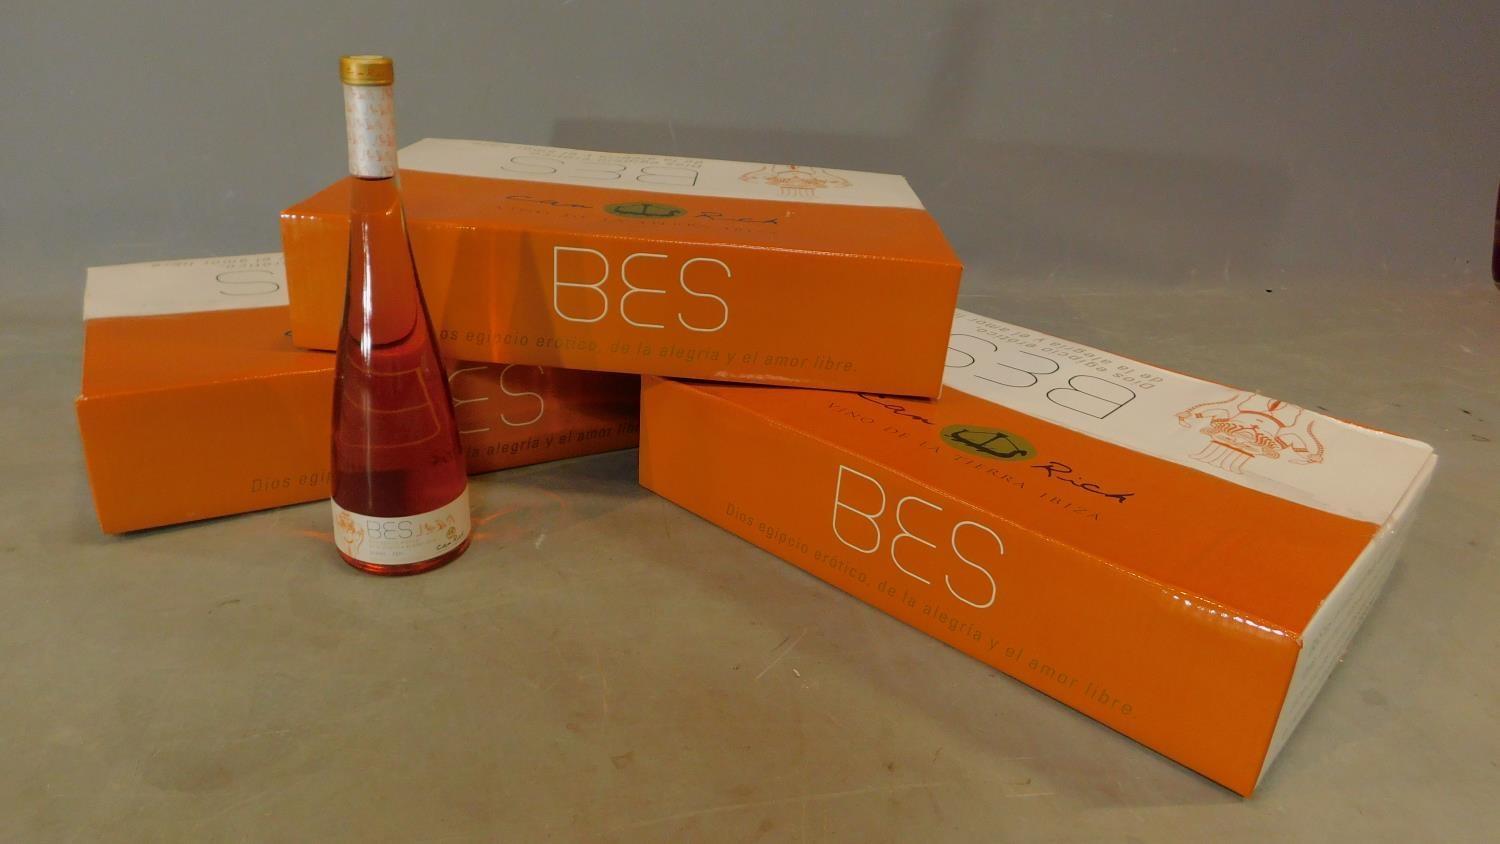 Three half case boxes of BES - Can Rich Syrah 2011 wine. Fuller body strength and taste.(18 bottles) - Image 2 of 3